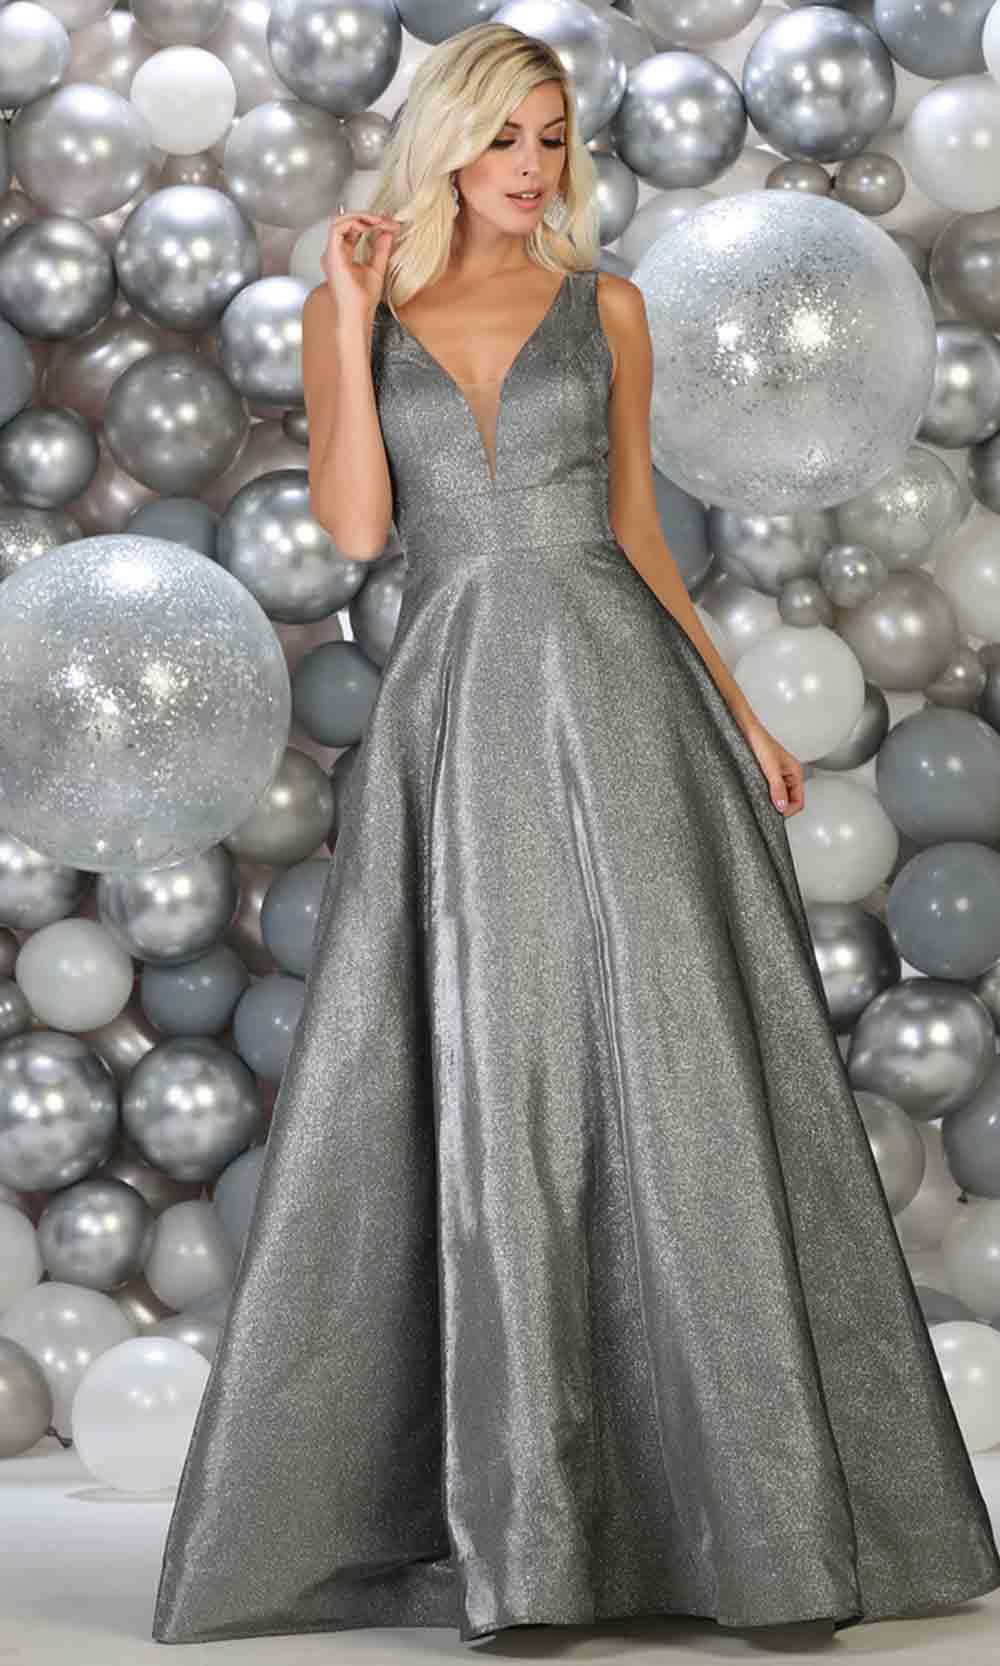 May Queen - RQ7755 Deep V Neck A-Line Gown In Silver